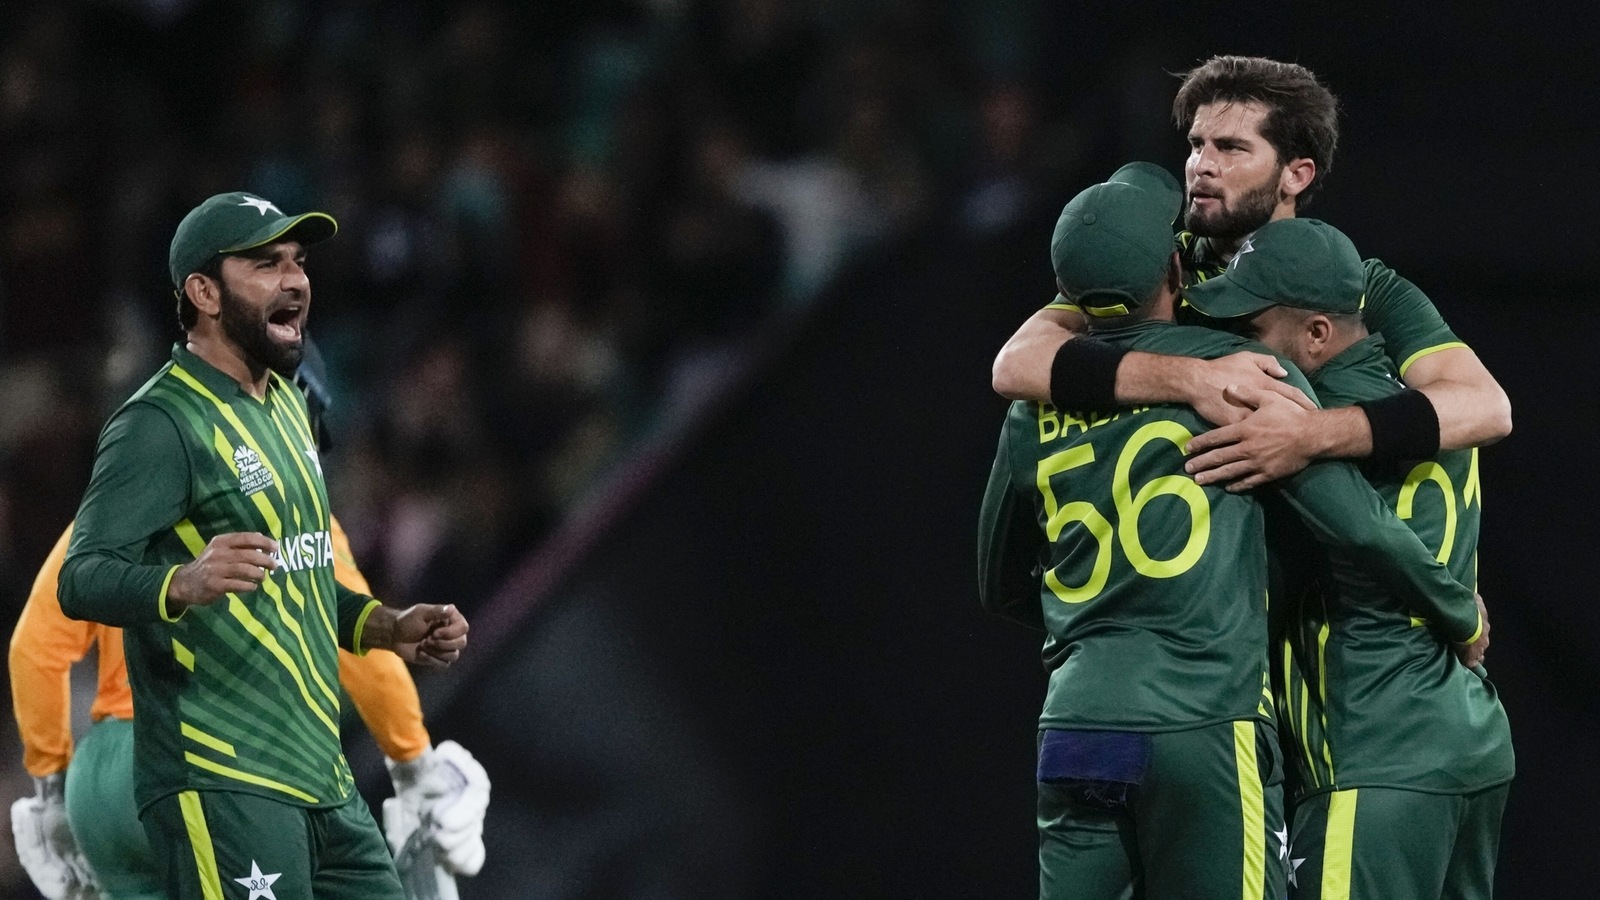 pakistan-vs-south-africa-t20-world-cup-2022-highlights-pak-beat-sa-by-33-runs-stay-in-race-for-semi-finals